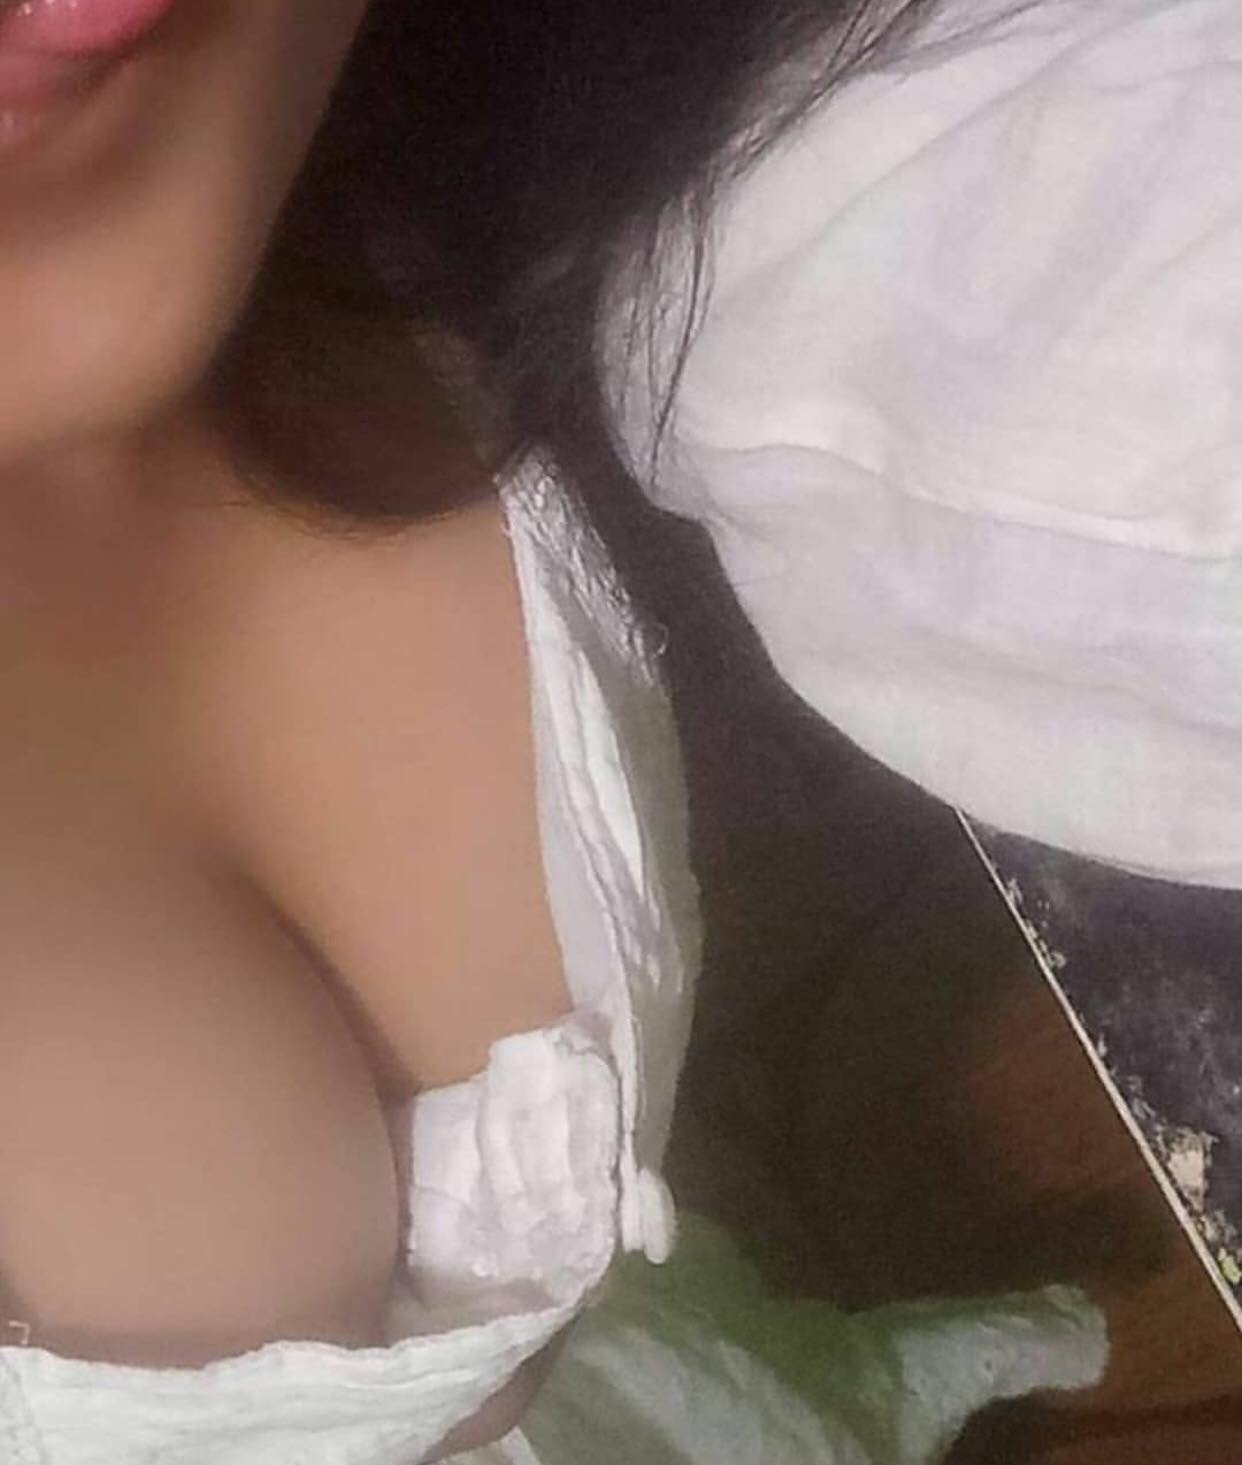 Photo by Slutty Nancy with the username @Nancy2211, who is a star user,  April 15, 2019 at 7:36 PM. The post is about the topic Amateurs and the text says 'follow and subscribe me on..
https://www.modelhub.com/slutty-nancy
https://www.pornhub.com/model/slutty-nancy'